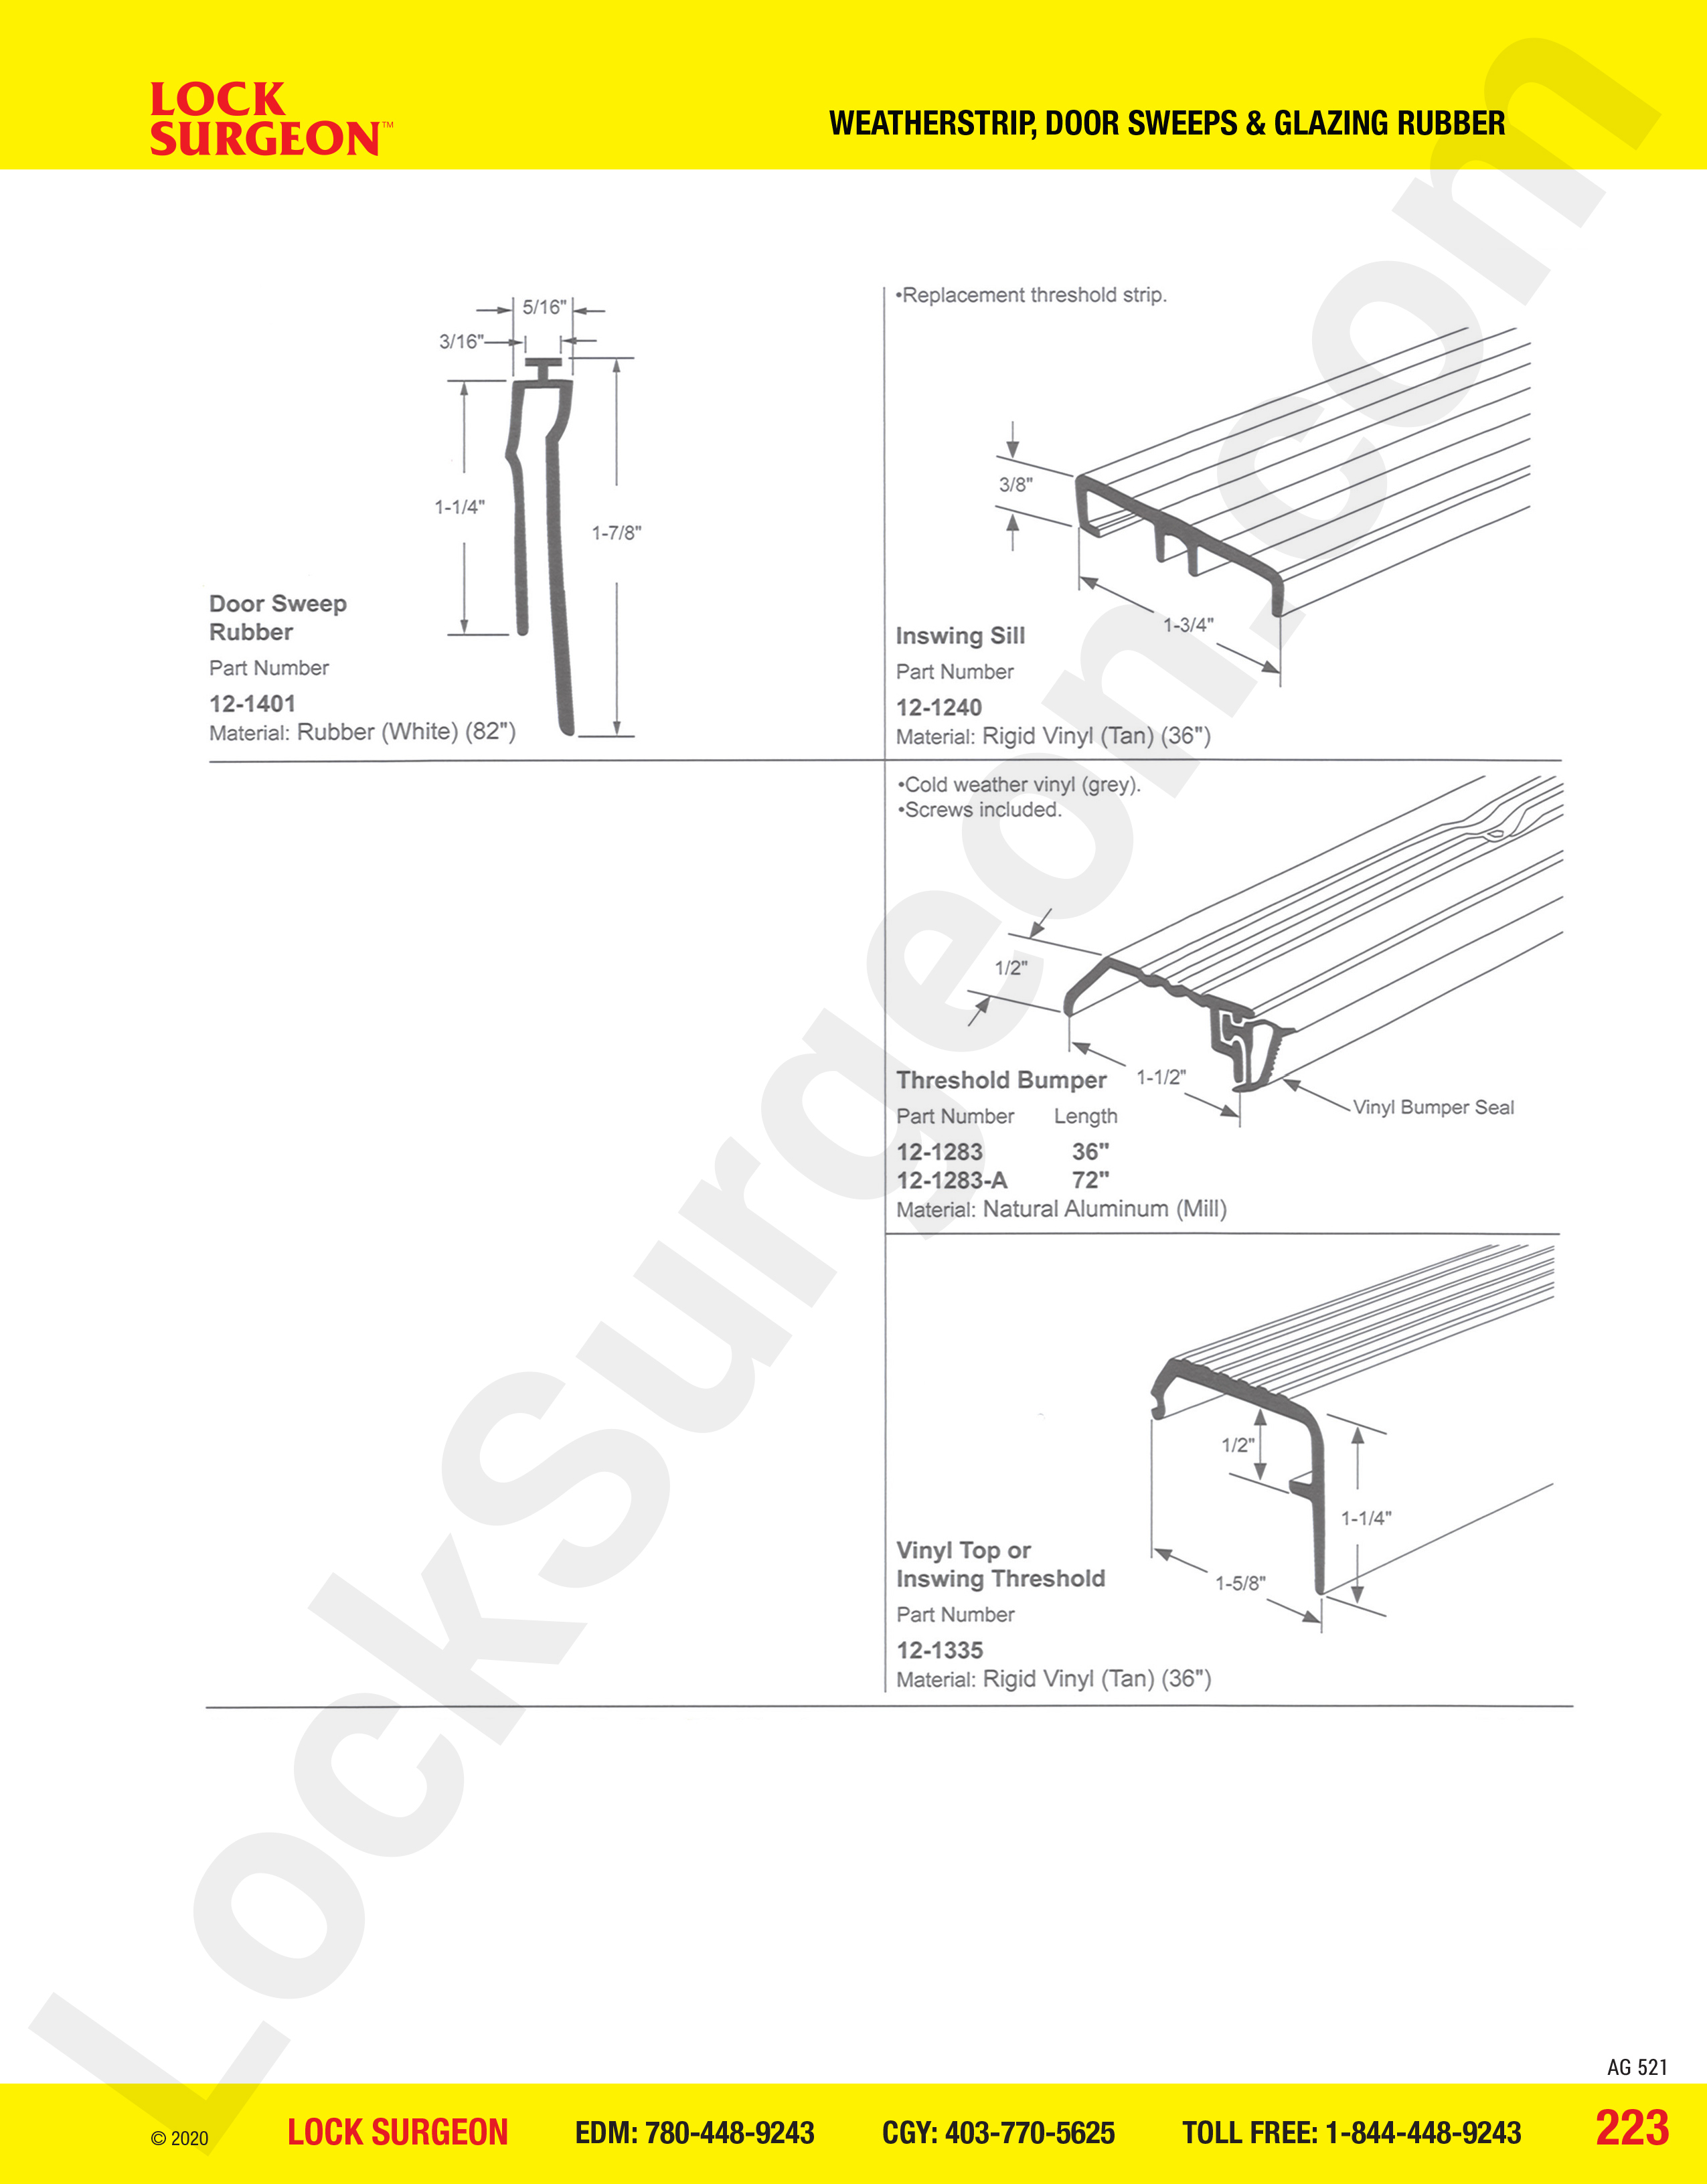 Acheson weatherstrip door sweeps and glazing rubber sill, bumper, threshold parts